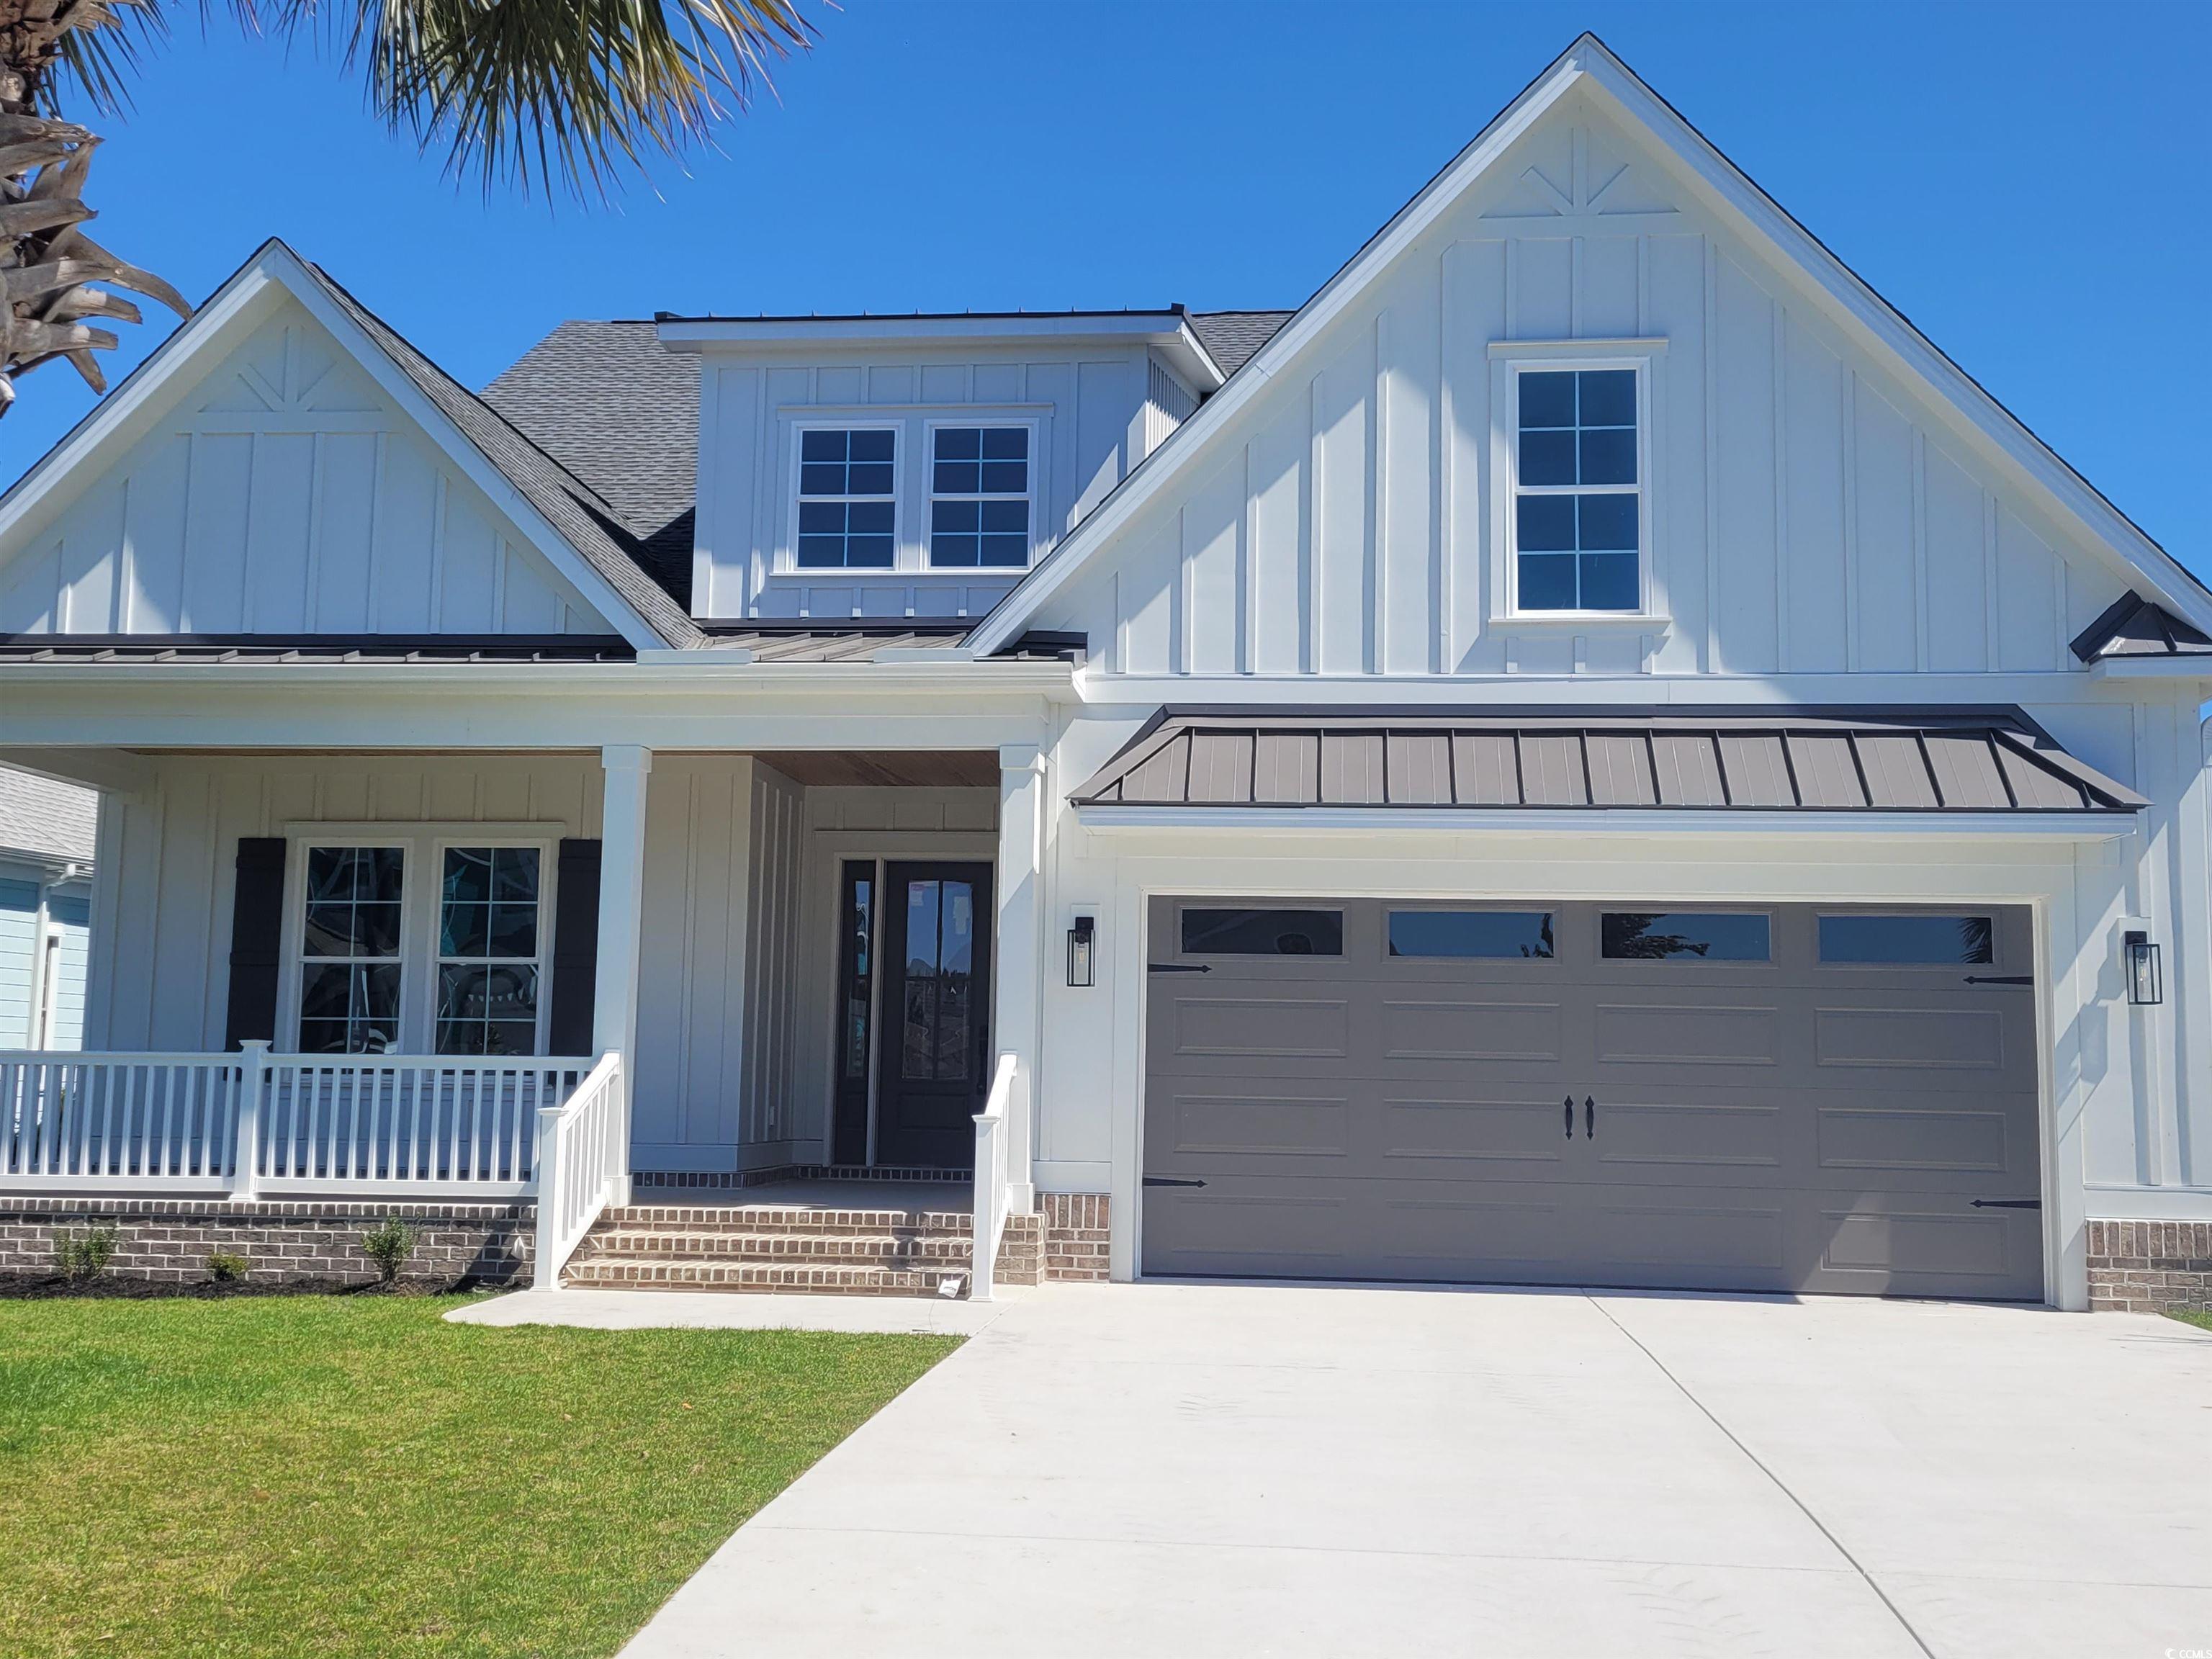 119 West Isle of Palms Ave. Myrtle Beach, SC 29579